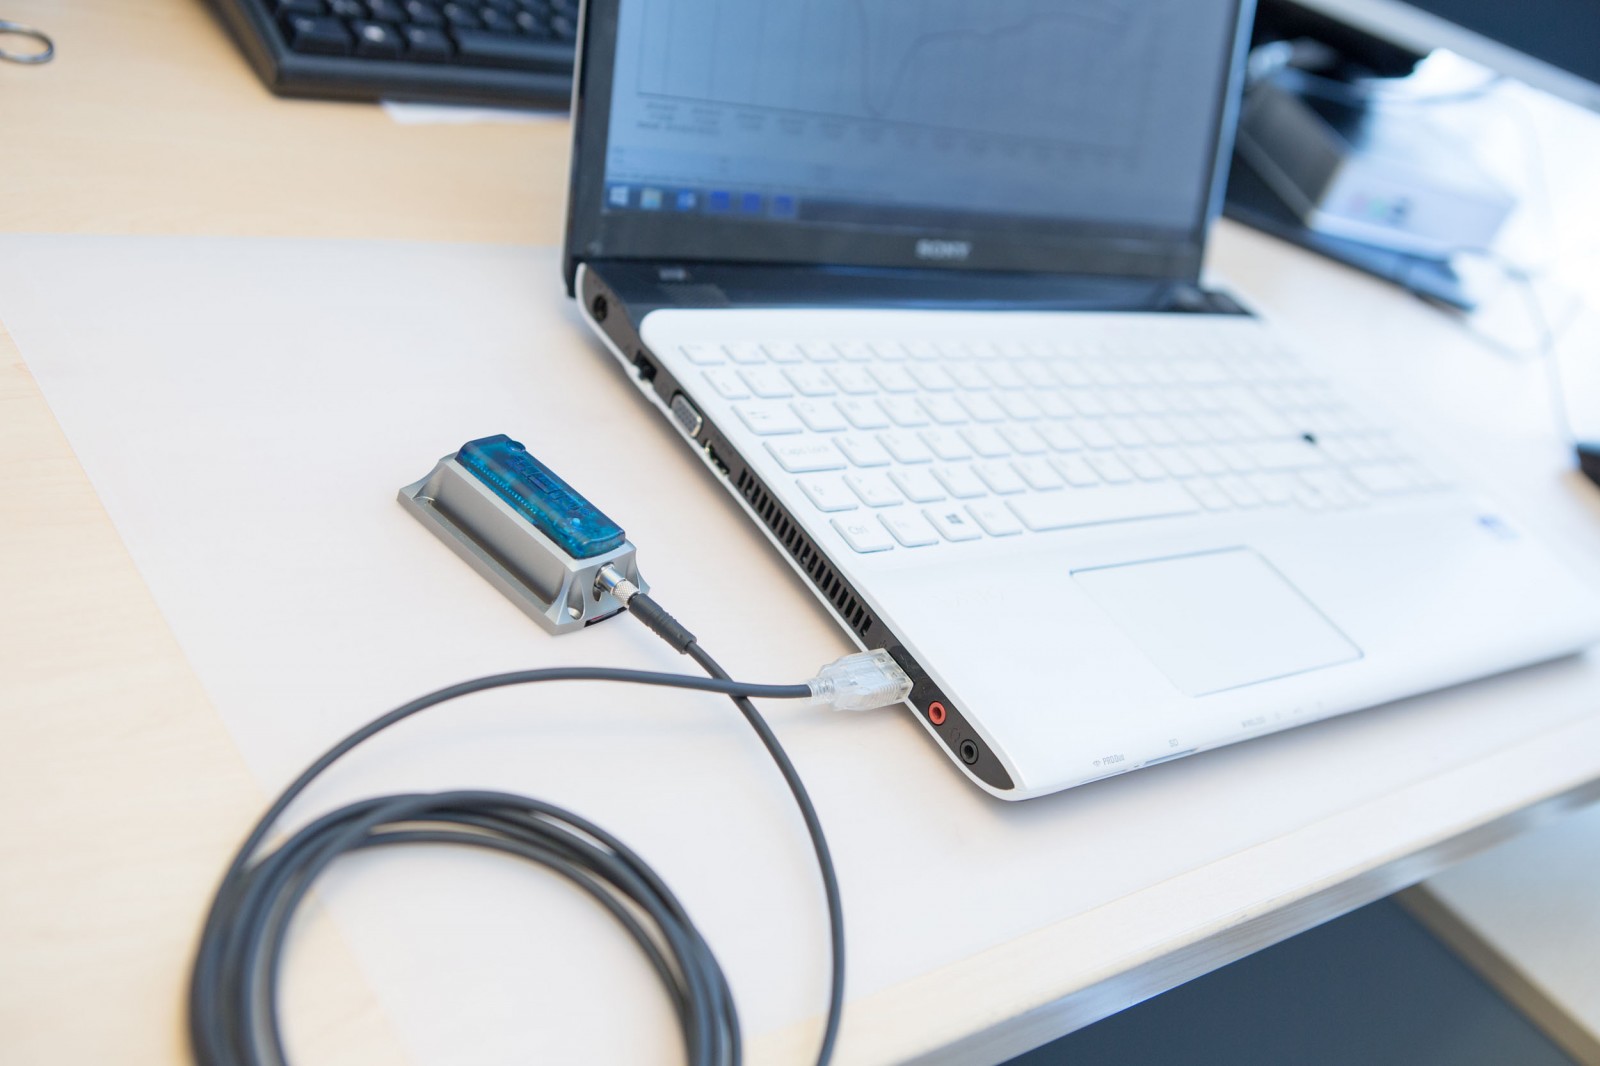 MSR165 data logger connected to notebook